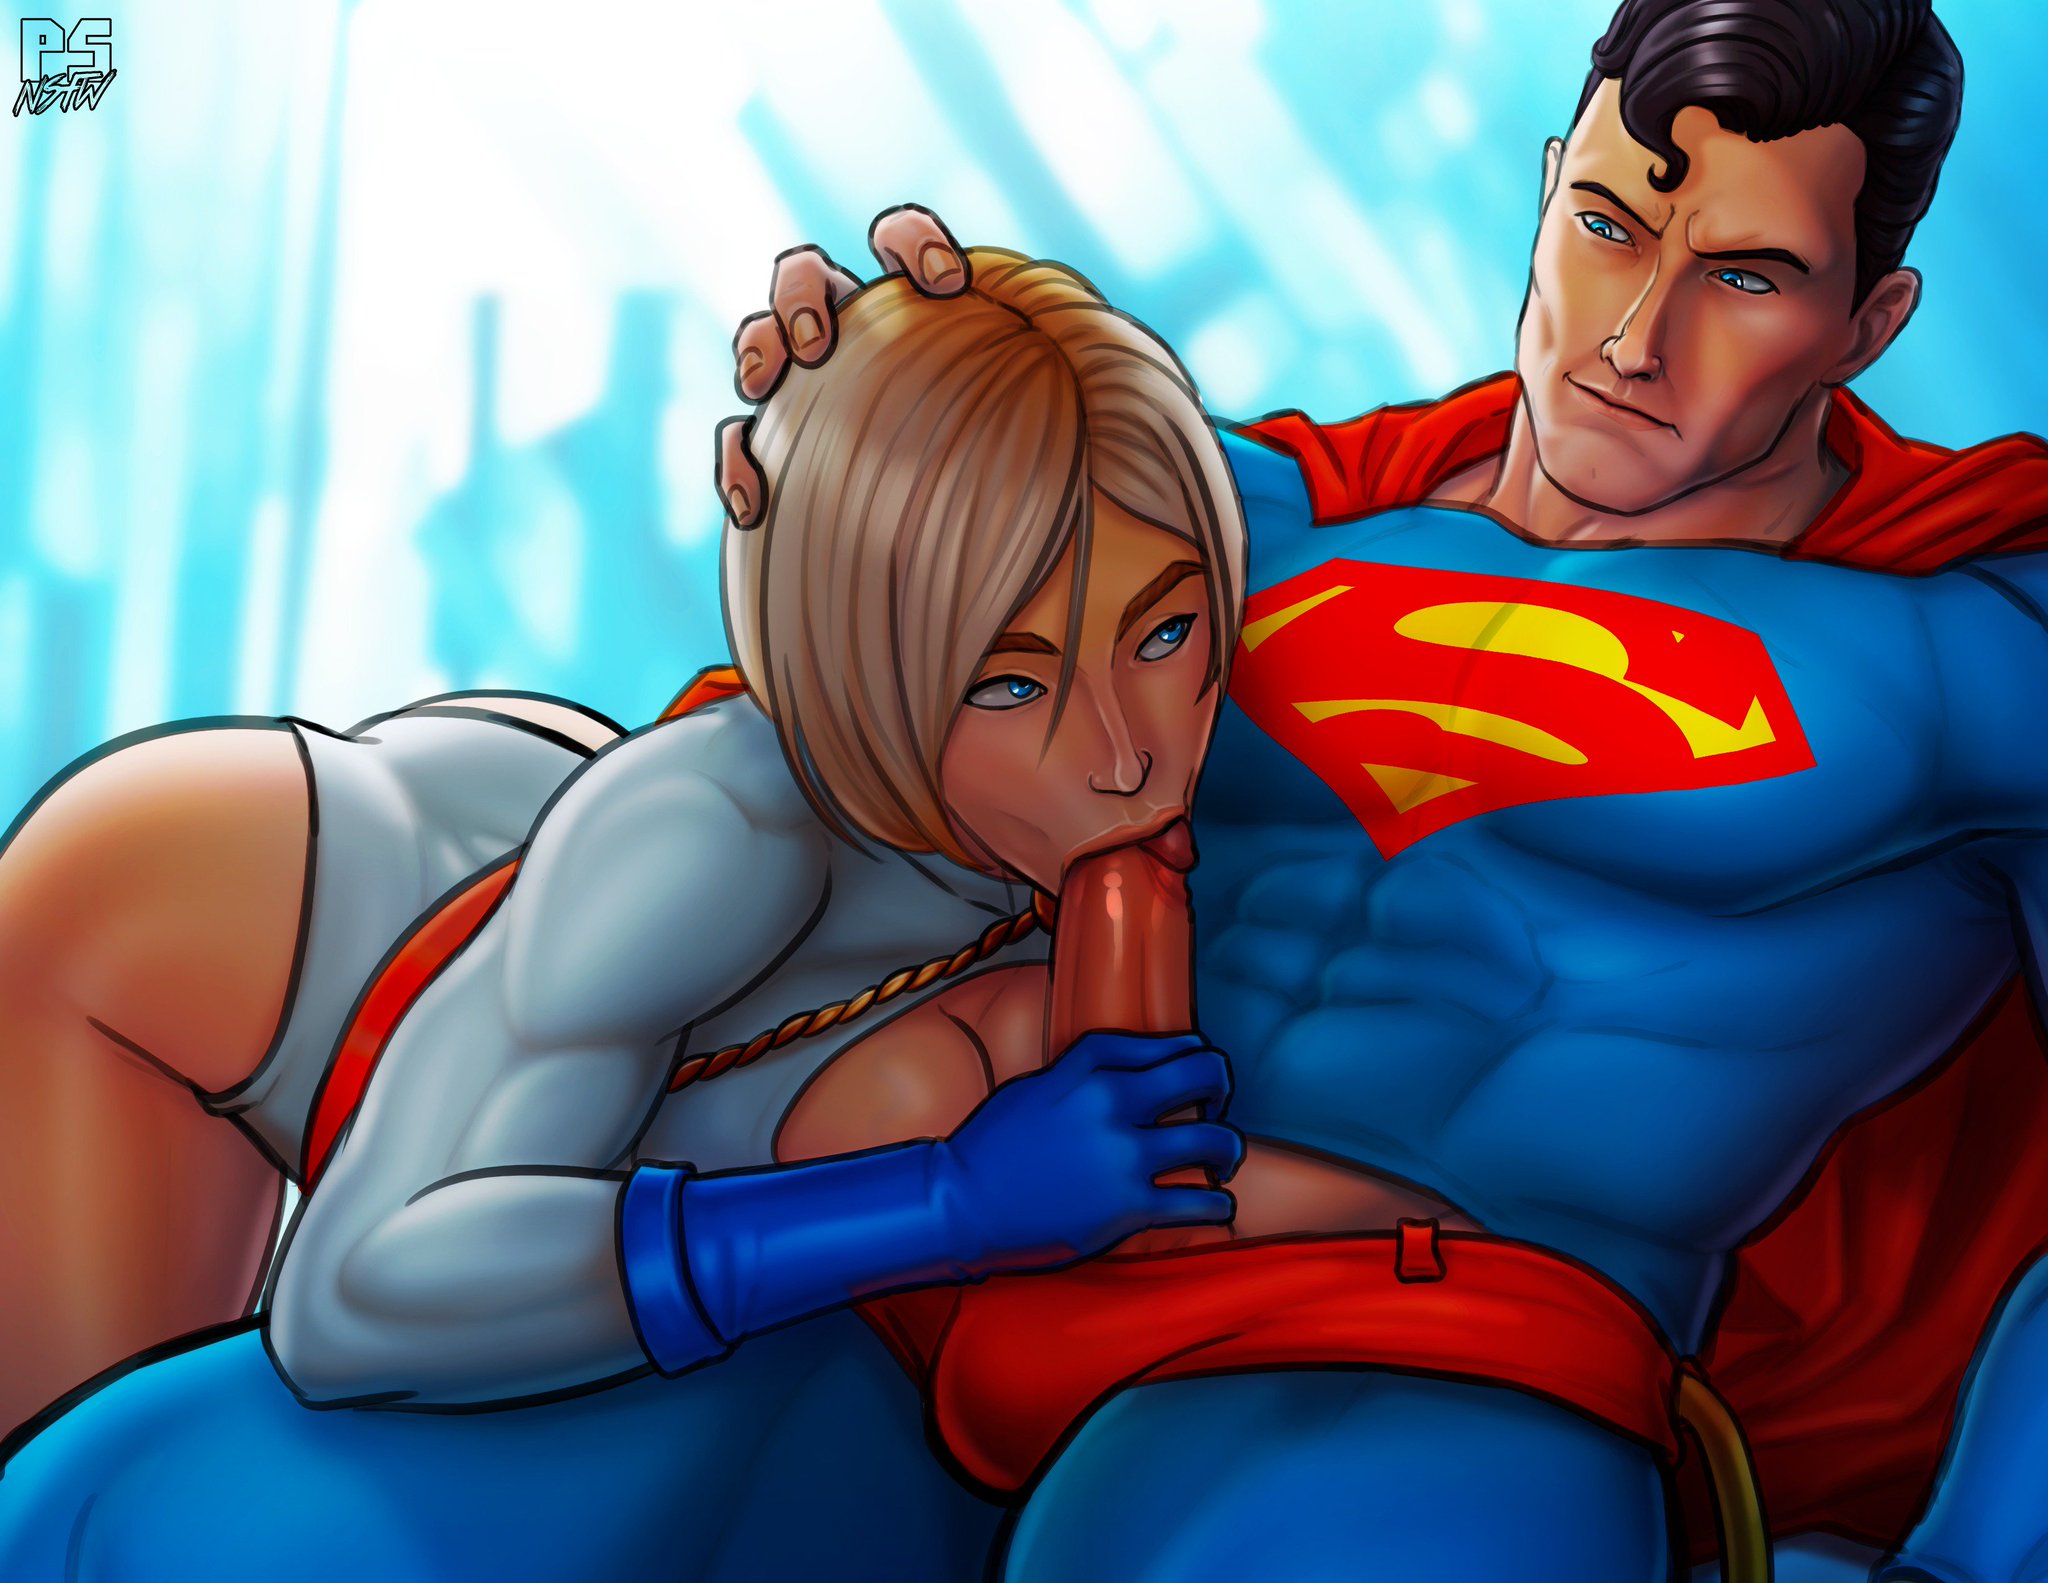 ＰｕｍｐＳ 🔞 on Twitter: "Commission: Powergirl and Superman https://t.co/...